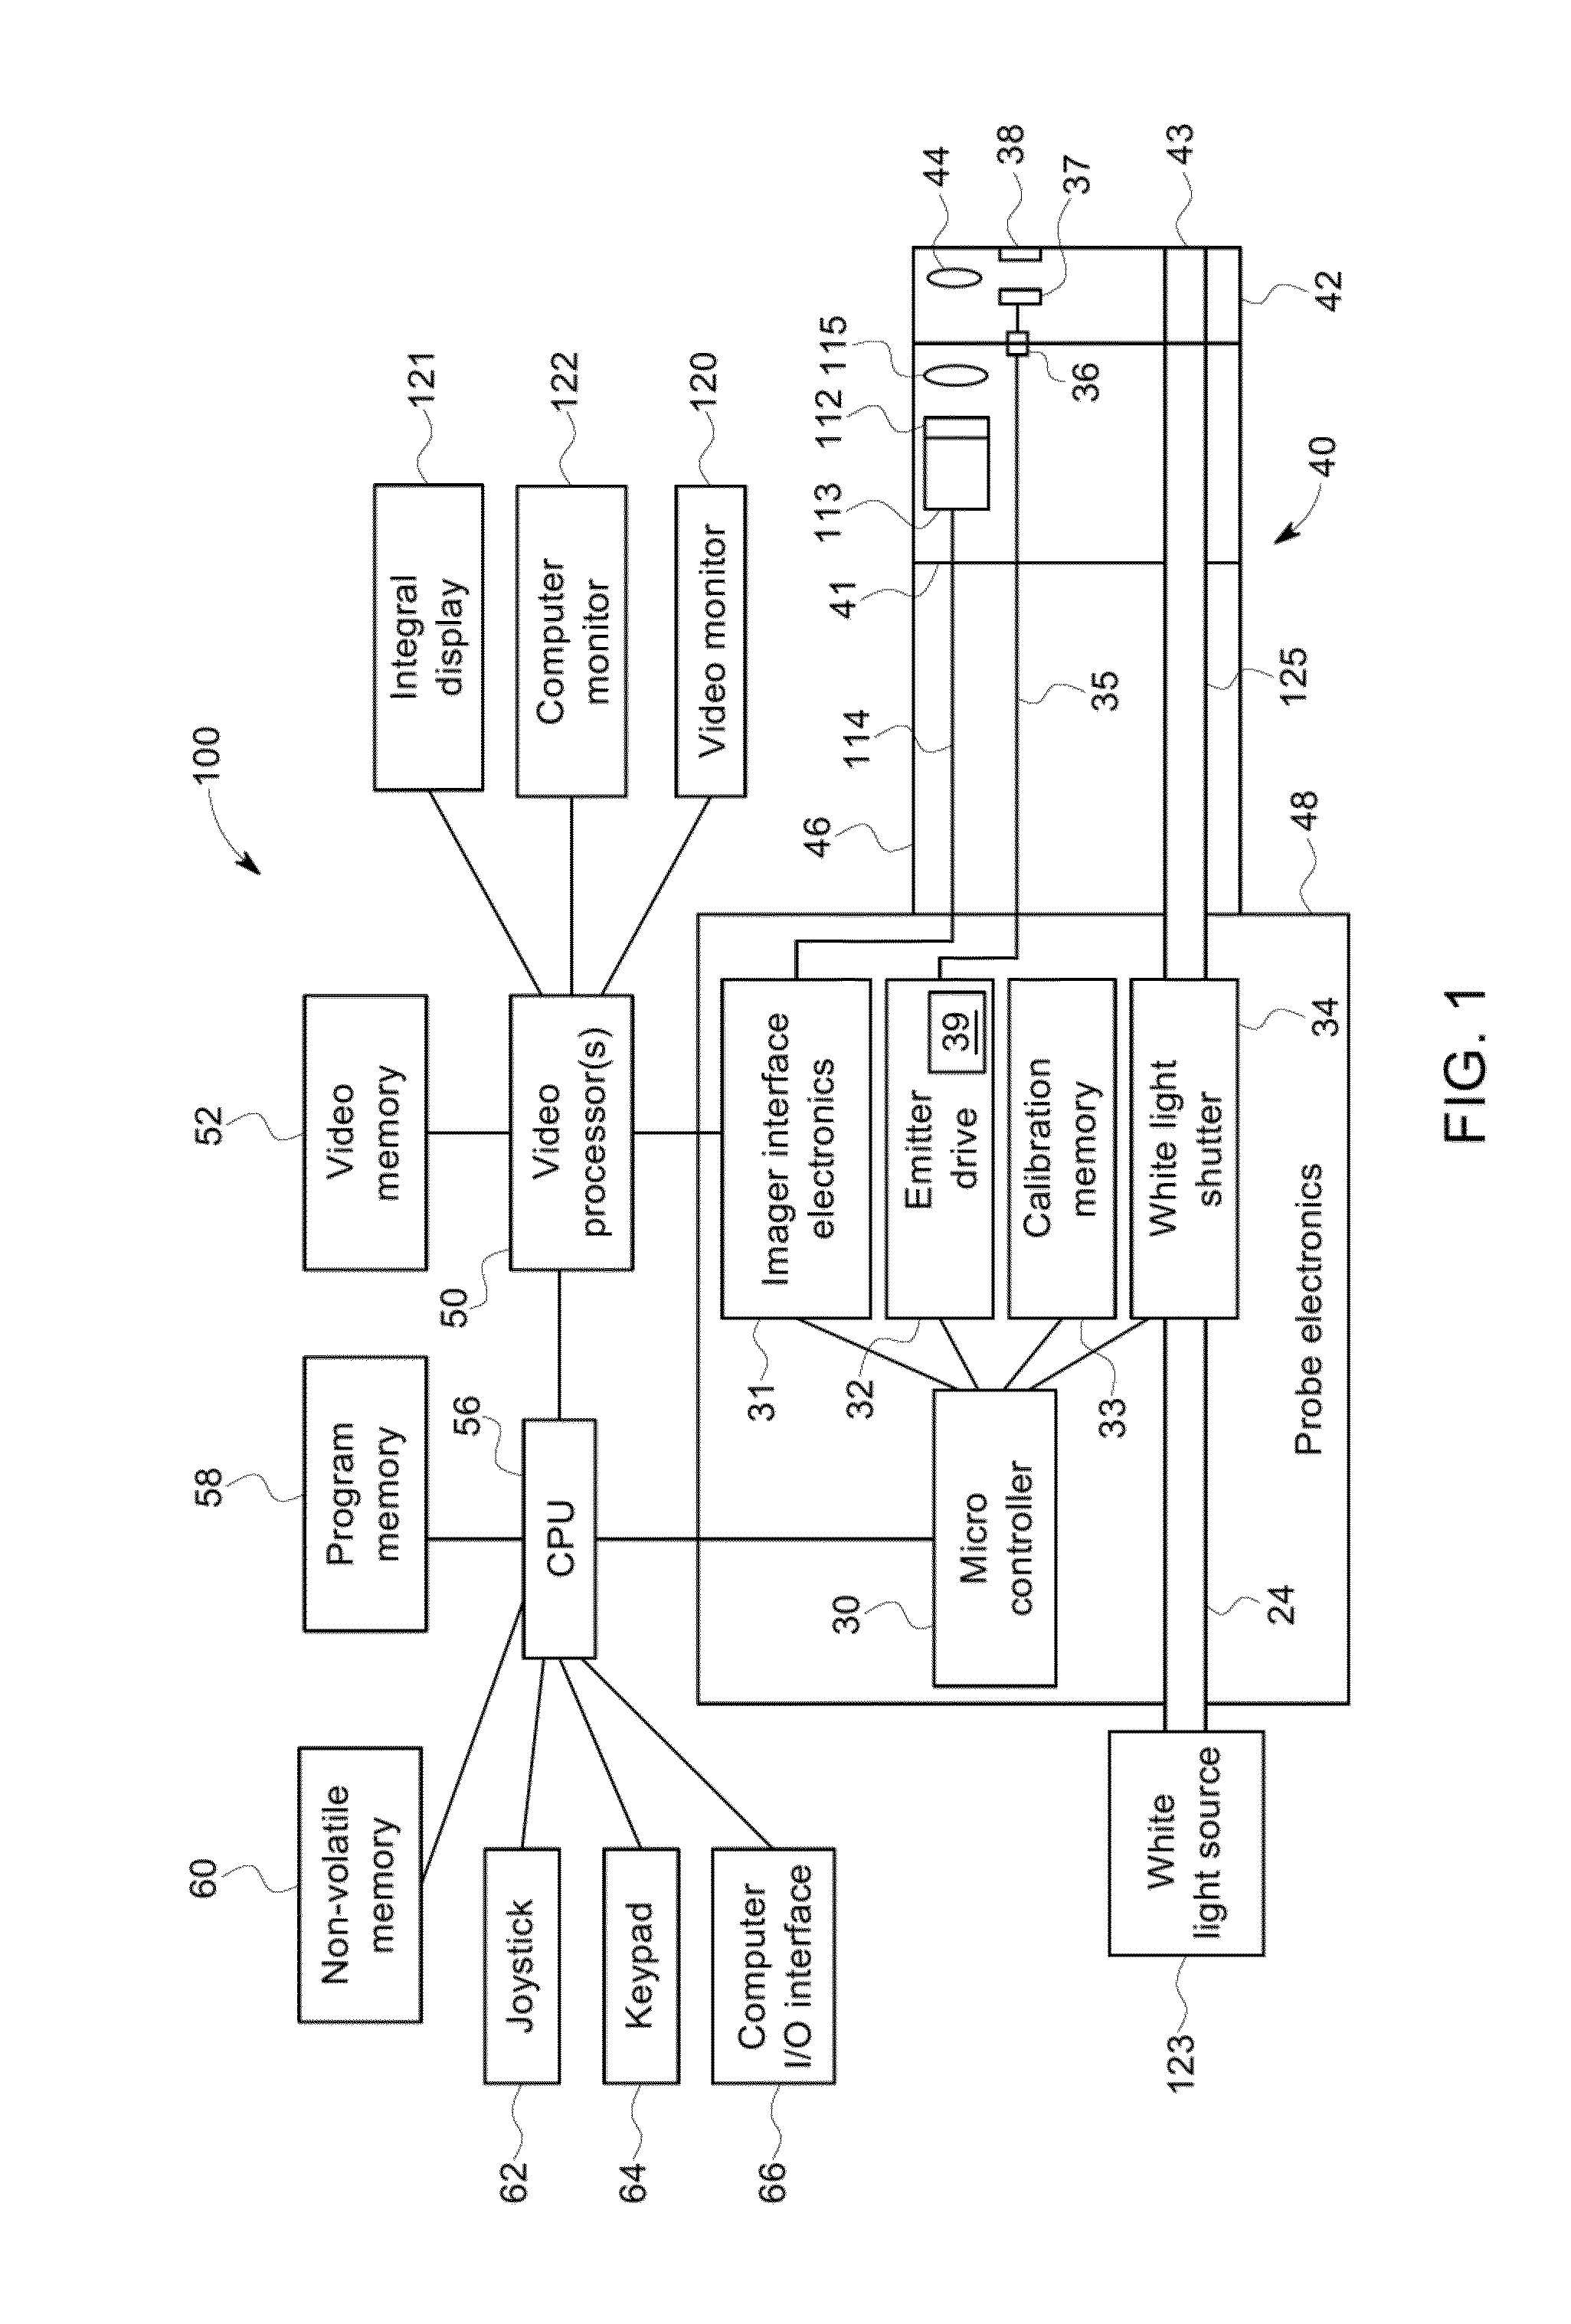 Method and system for detecting known measurable object features